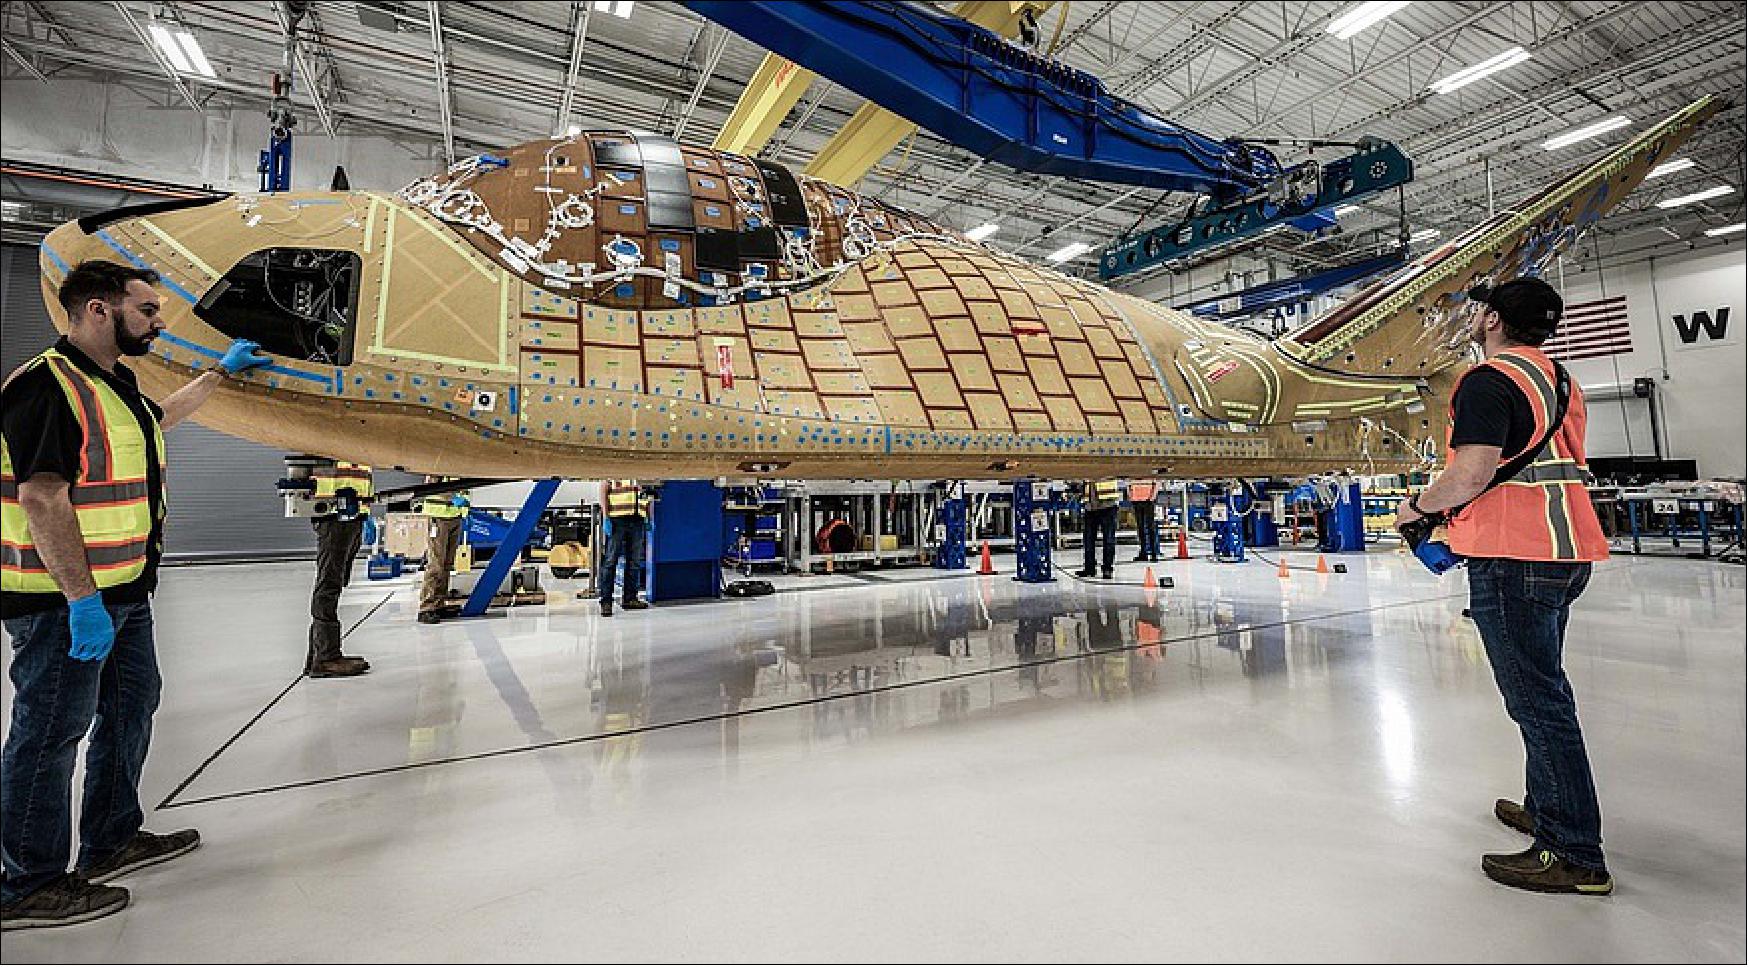 Figure 4: The first Dream Chaser vehicle, built for ISS cargo missions, nears completion at a Sierra Space facility in Colorado (image credit: Sierra Space)